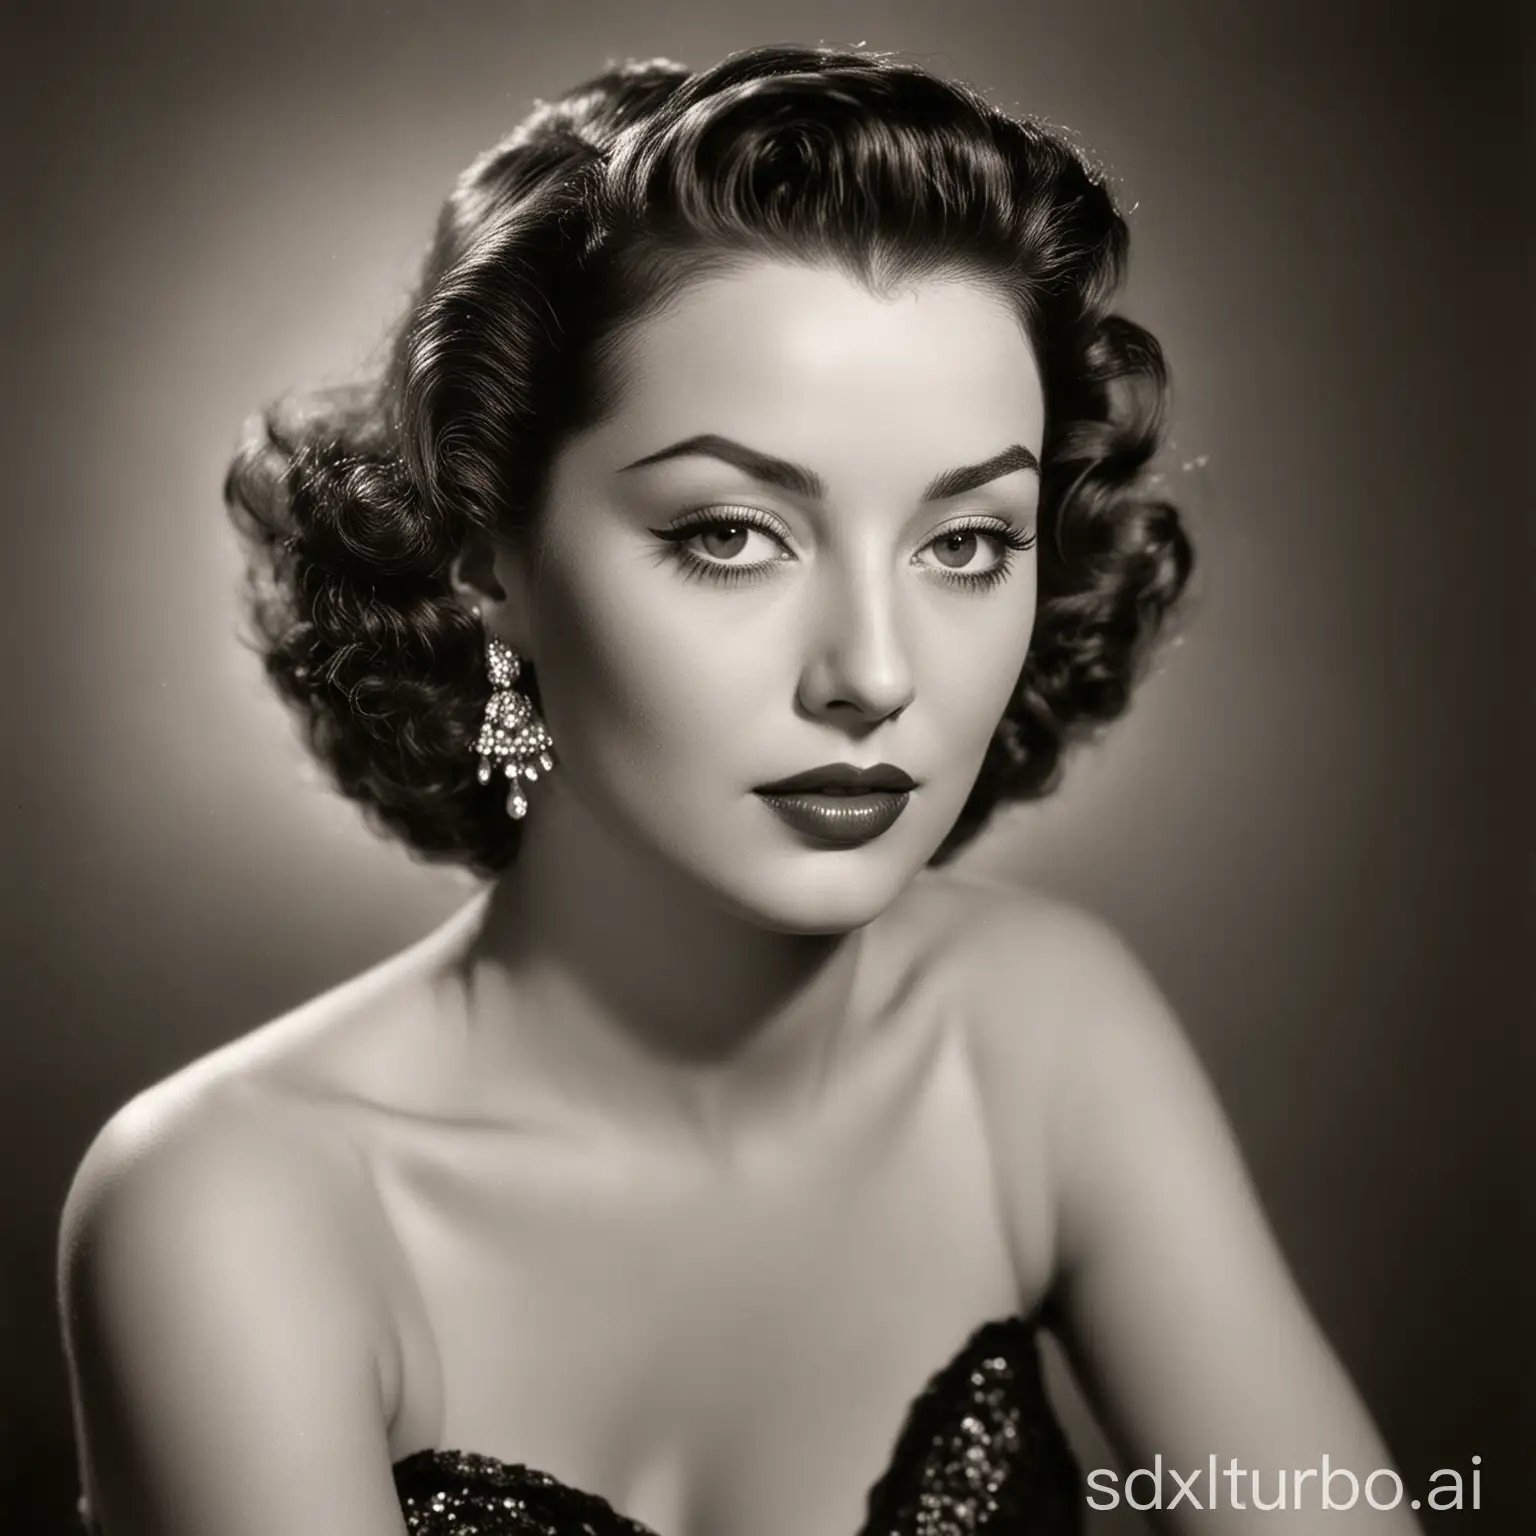 Glamourous-Woman-in-Classic-Hollywood-Portrait